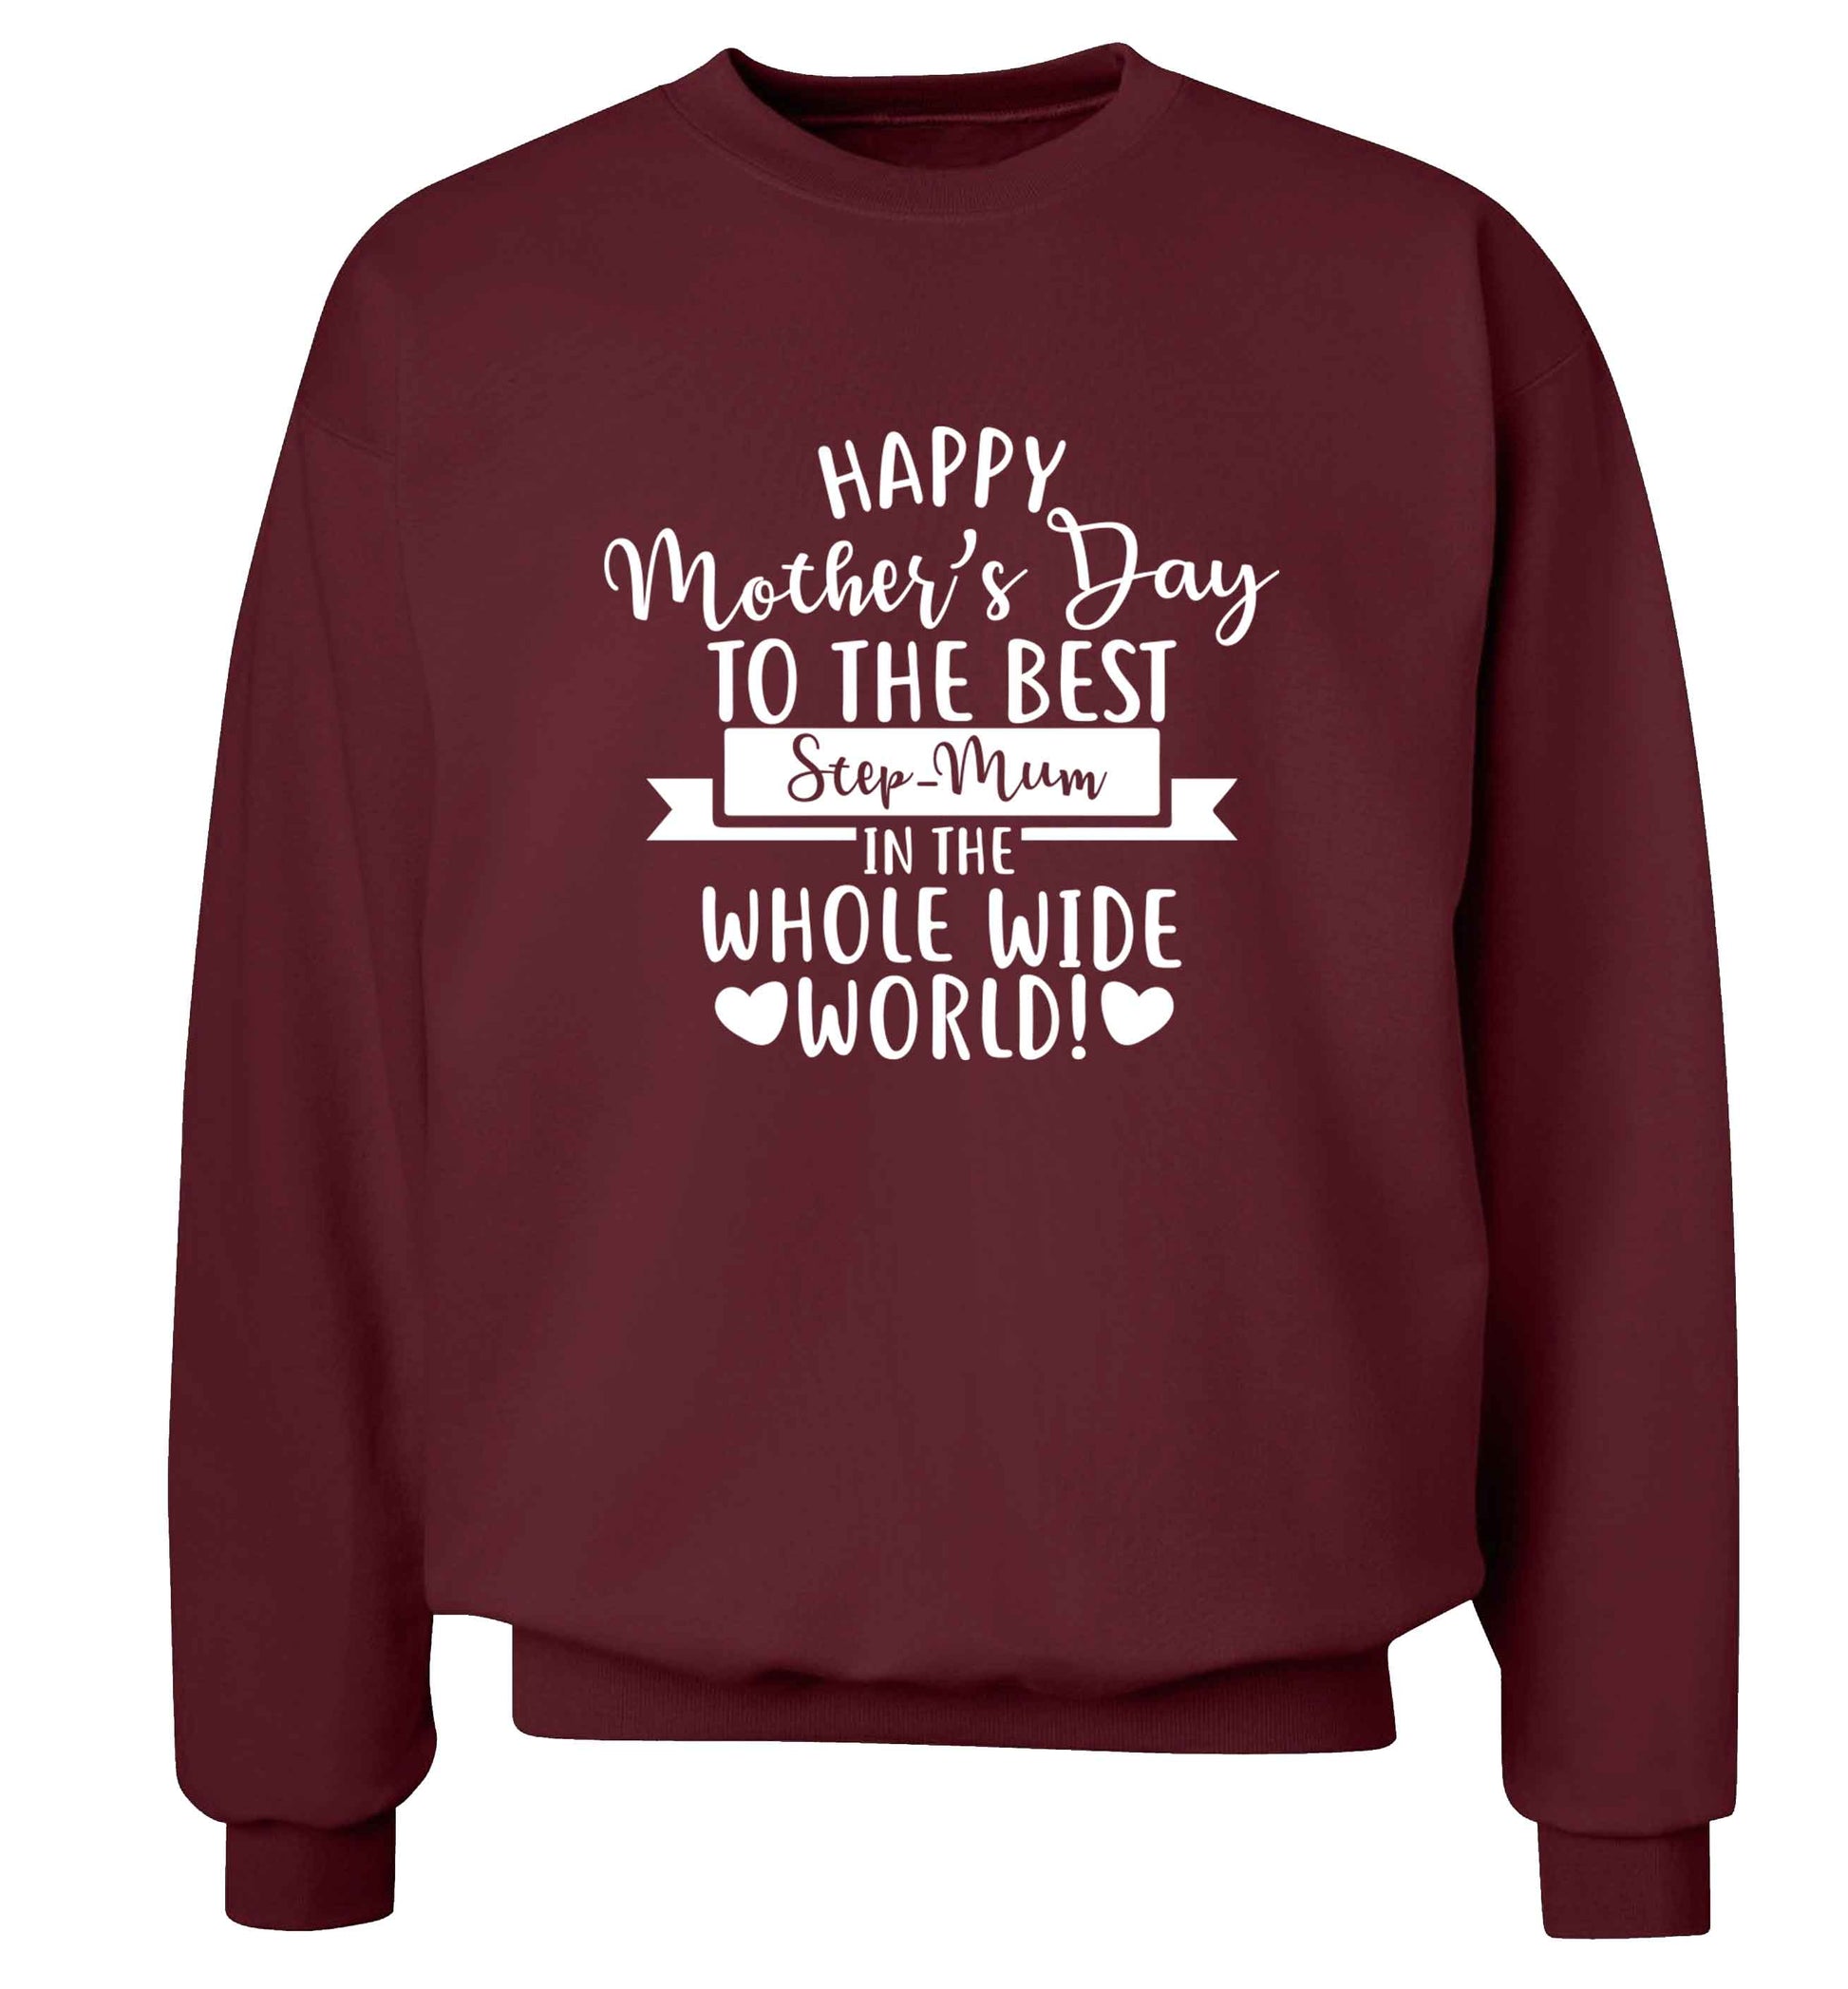 Happy mother's day to the best step-mum in the world adult's unisex maroon sweater 2XL